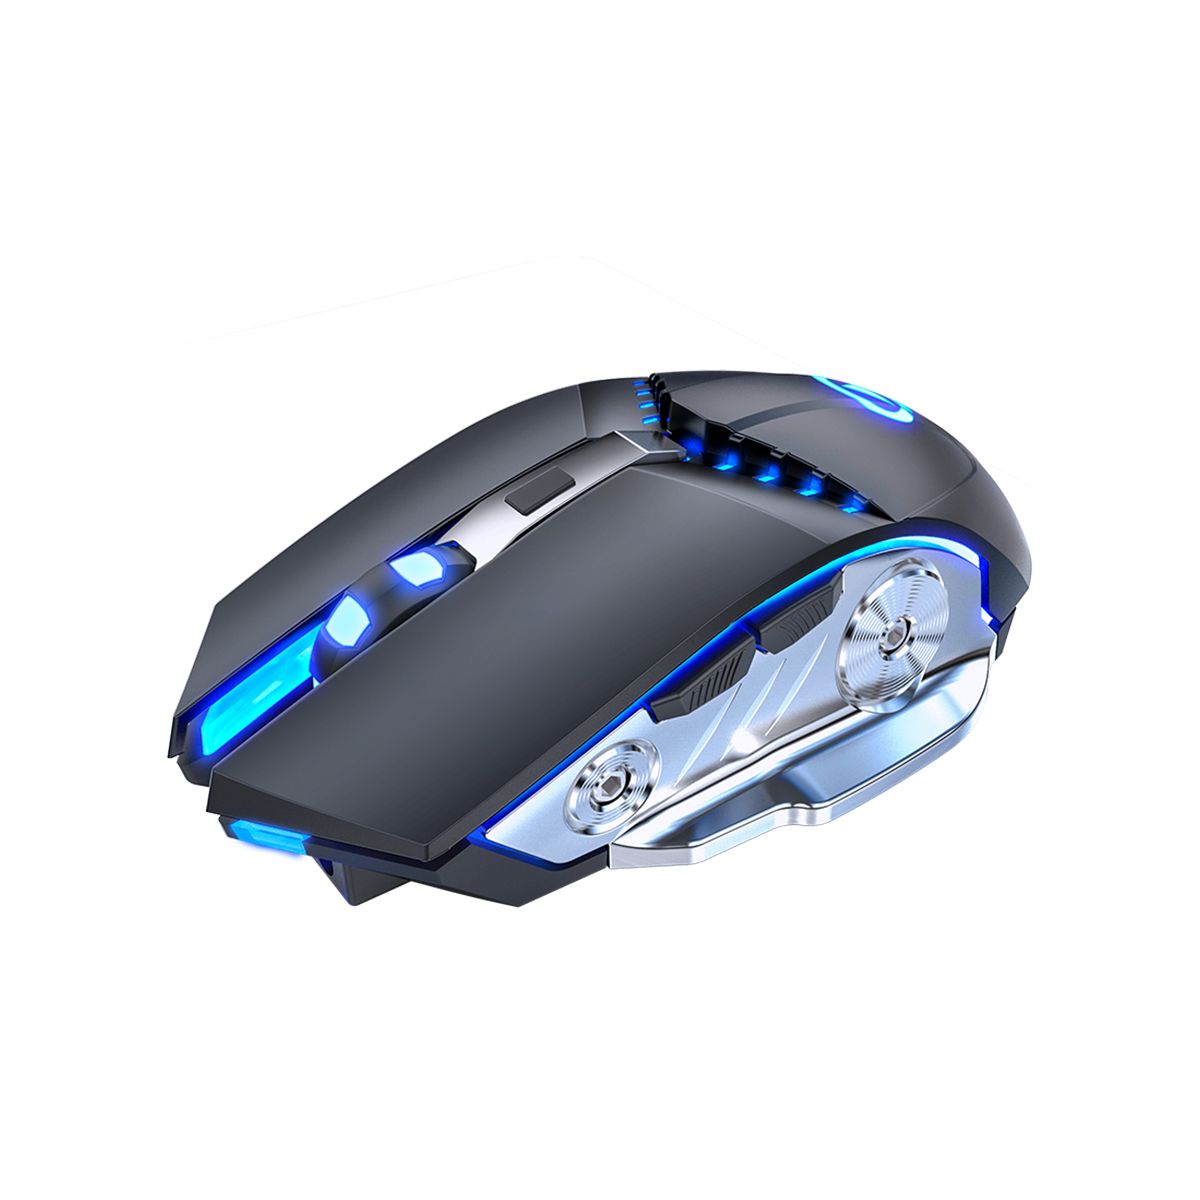 24G-Wireless-Gaming-Mouse-Sound-Silent-Rechargeable-Mouse-Blue-Backlight-With-Receiver-for-Laptop-De-1751640